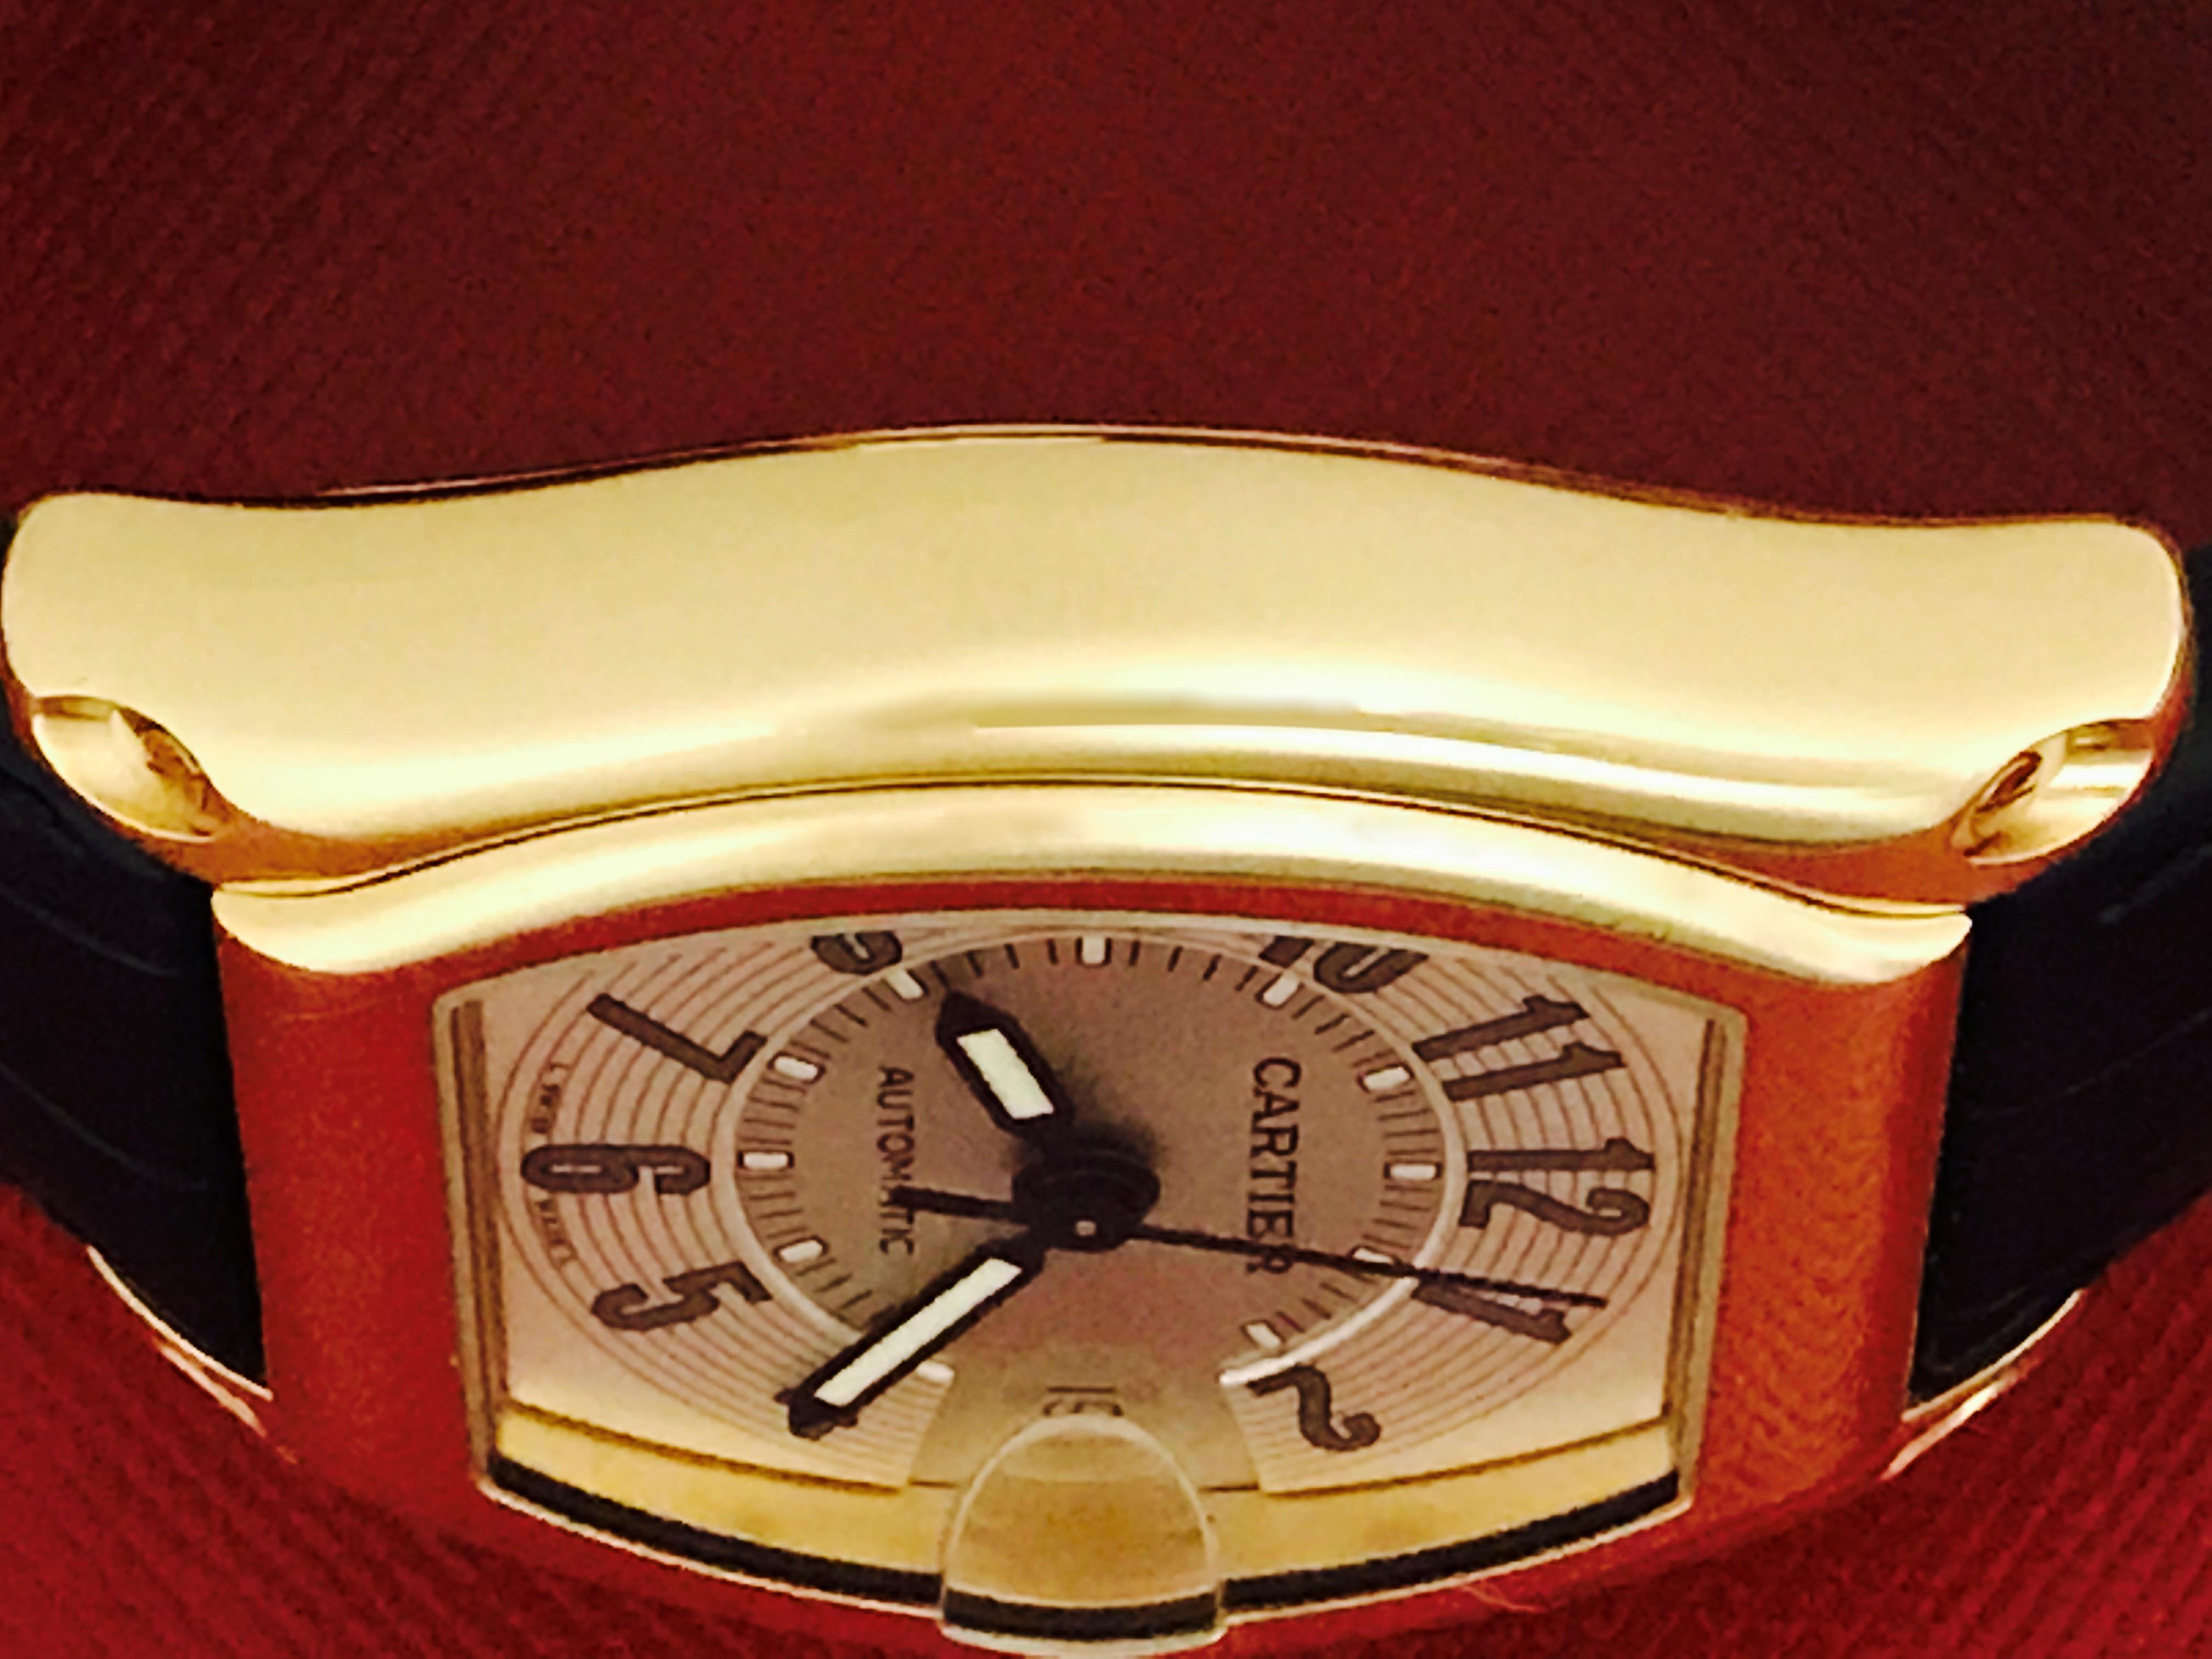 Cartier Yellow Gold Roadster Automatic Wristwatch Ref W62002Y2 In Excellent Condition For Sale In Dallas, TX